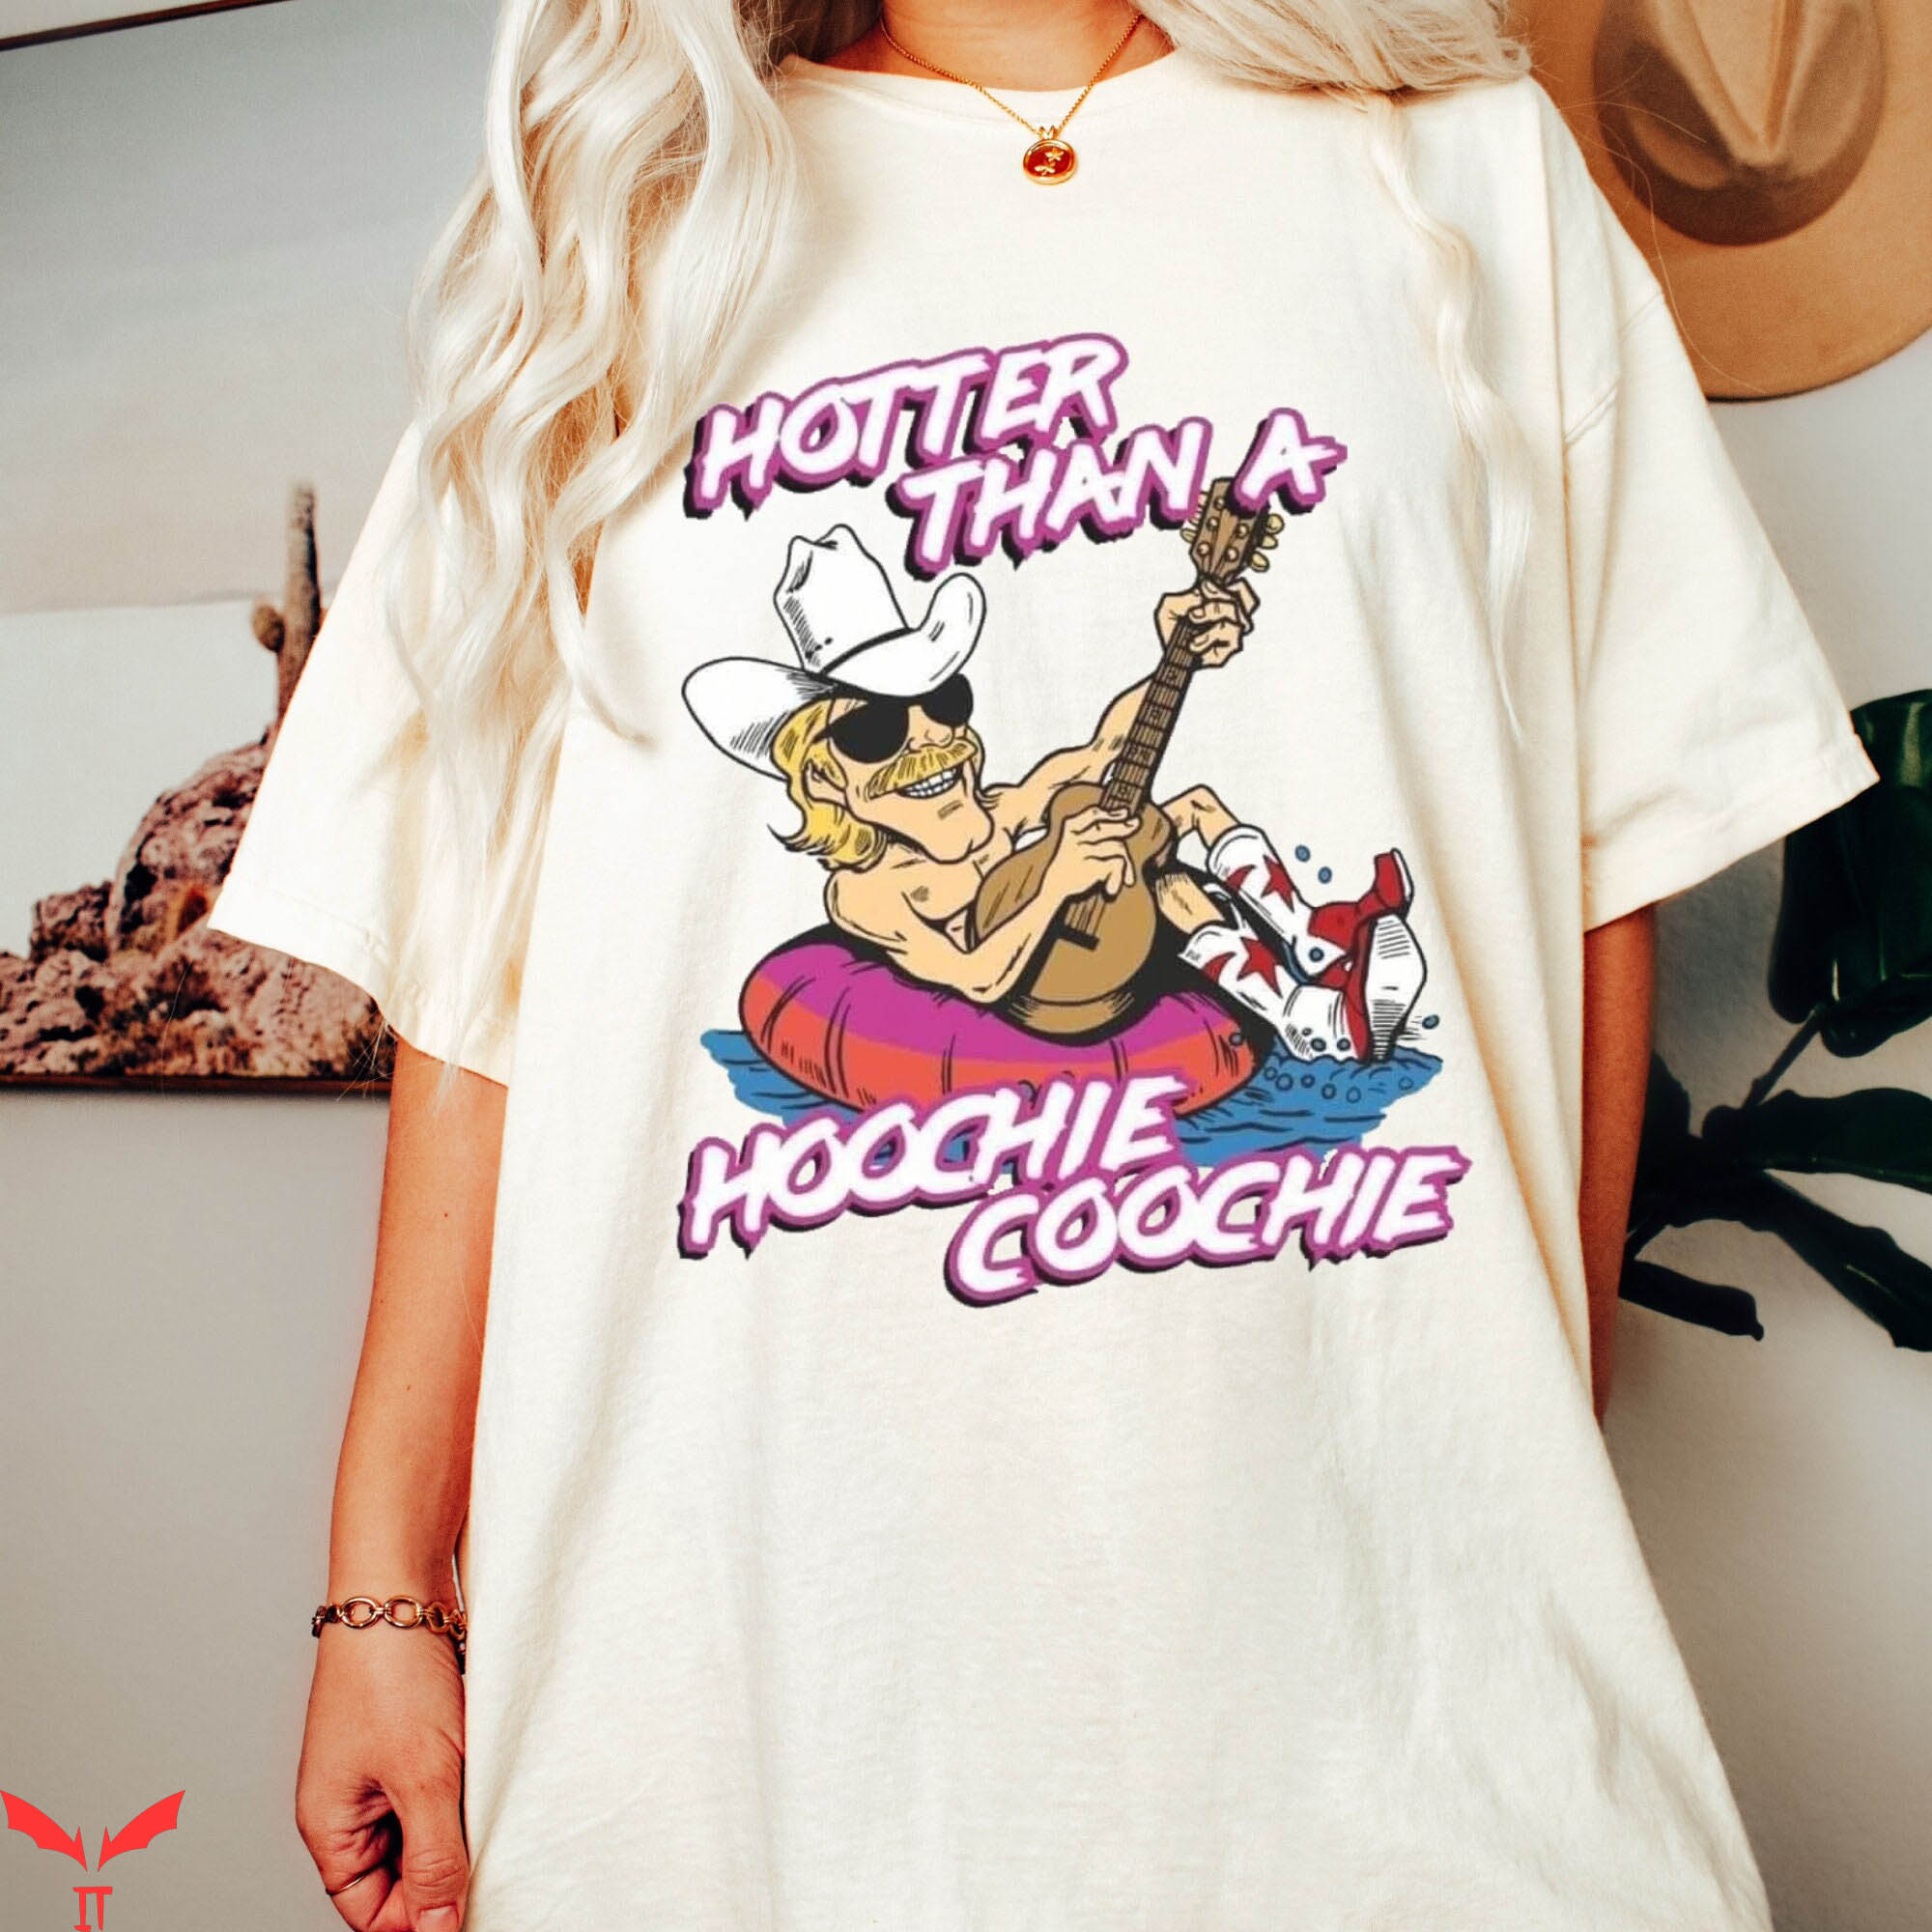 Vintage Country Music T-Shirt Hotter Than A Hoochie Coochie